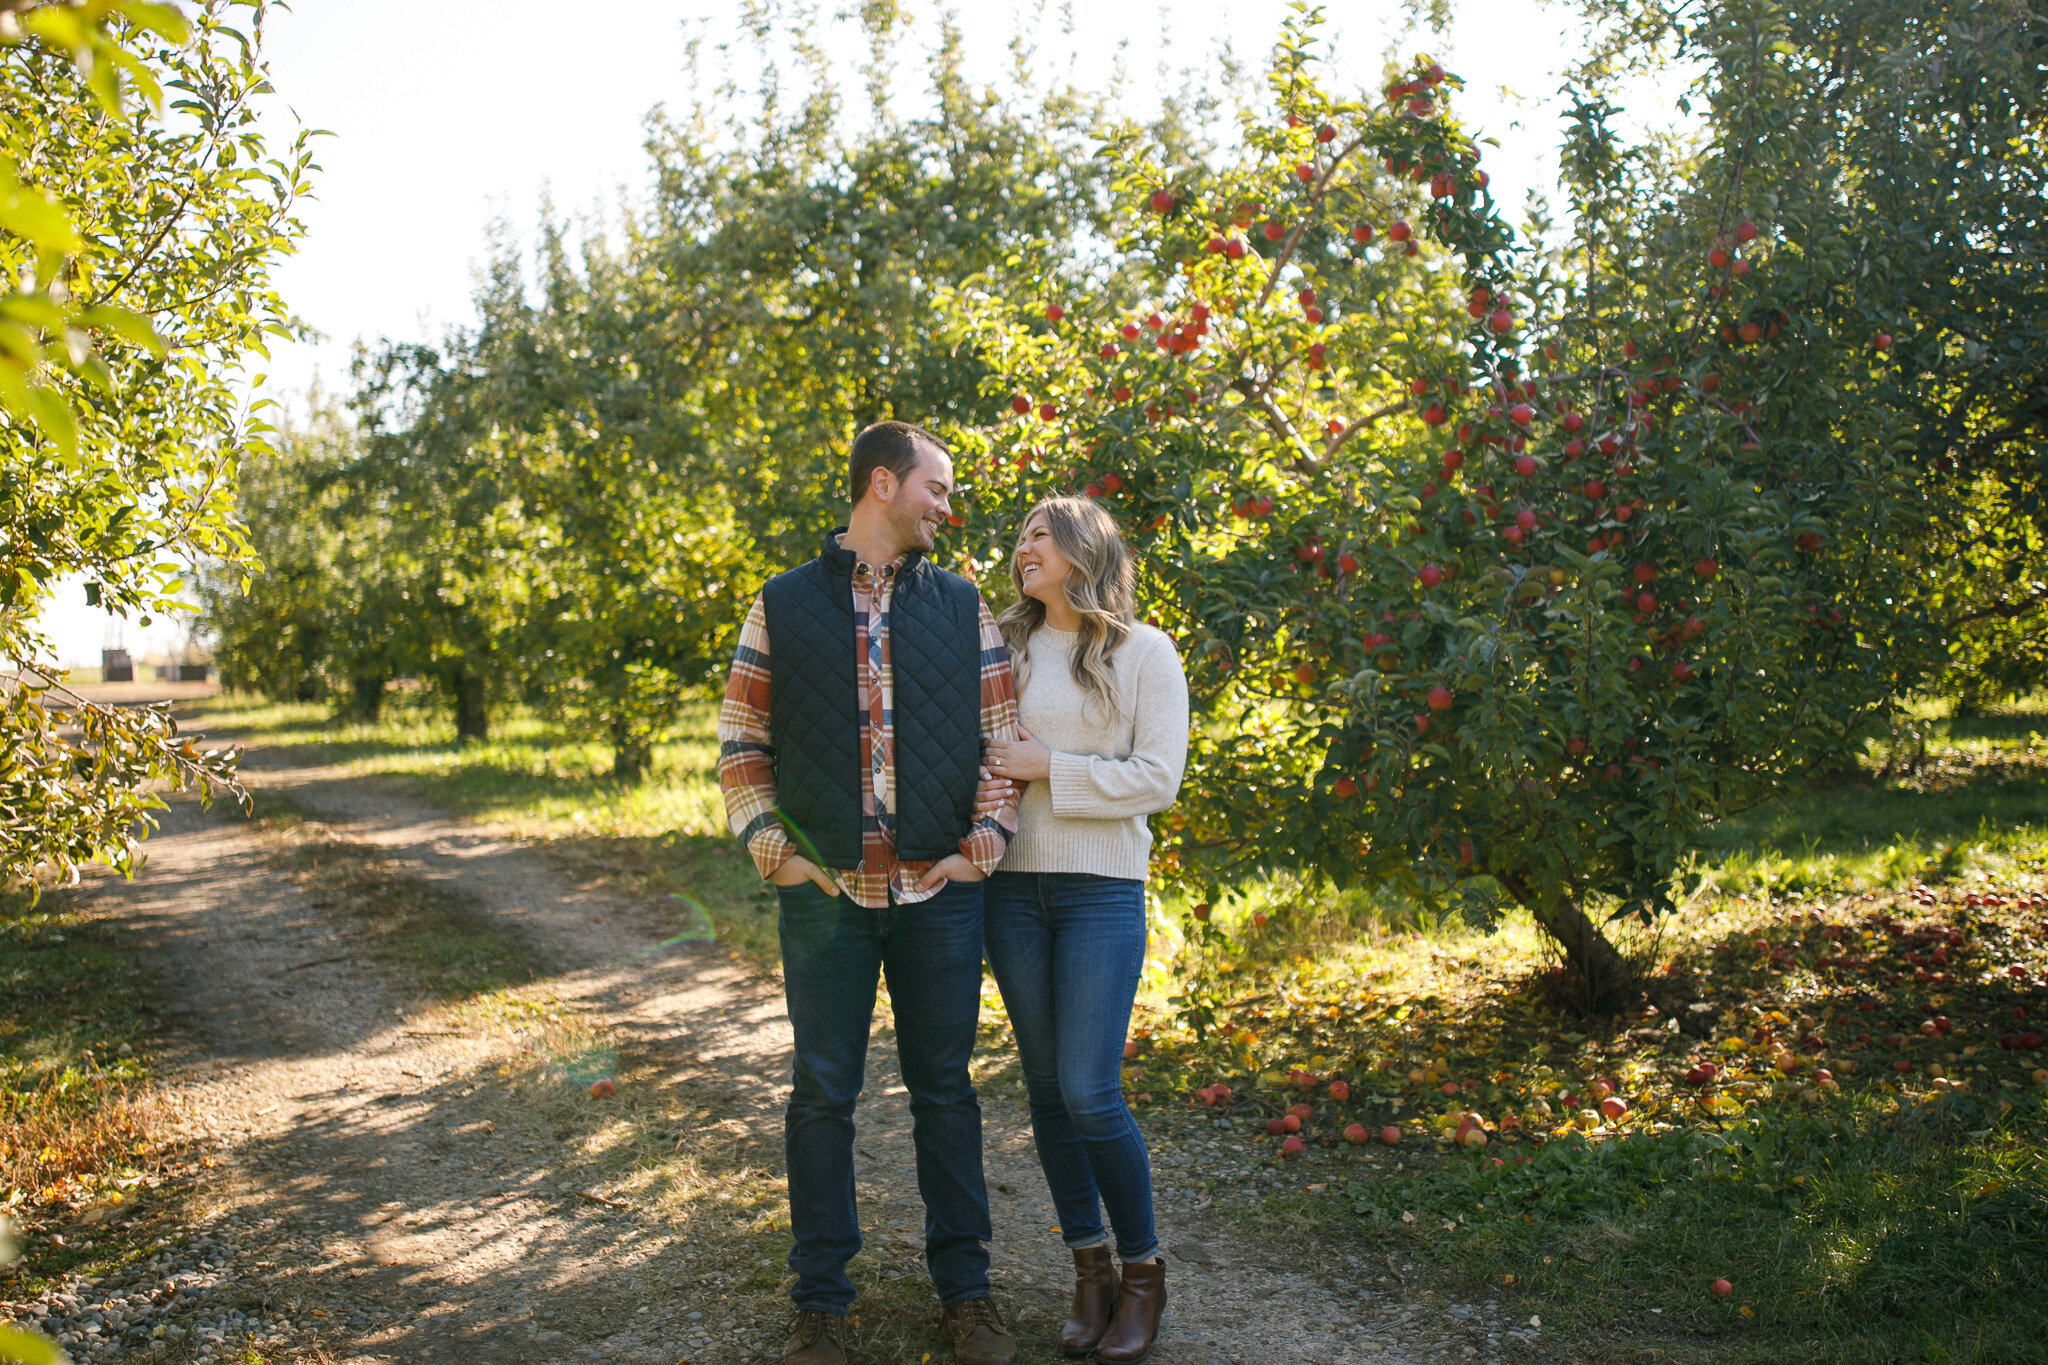 Libby and Alex Engaged Preview 2020 - Grand Rapids Wedding Photographer - J Darling Photo010.jpg